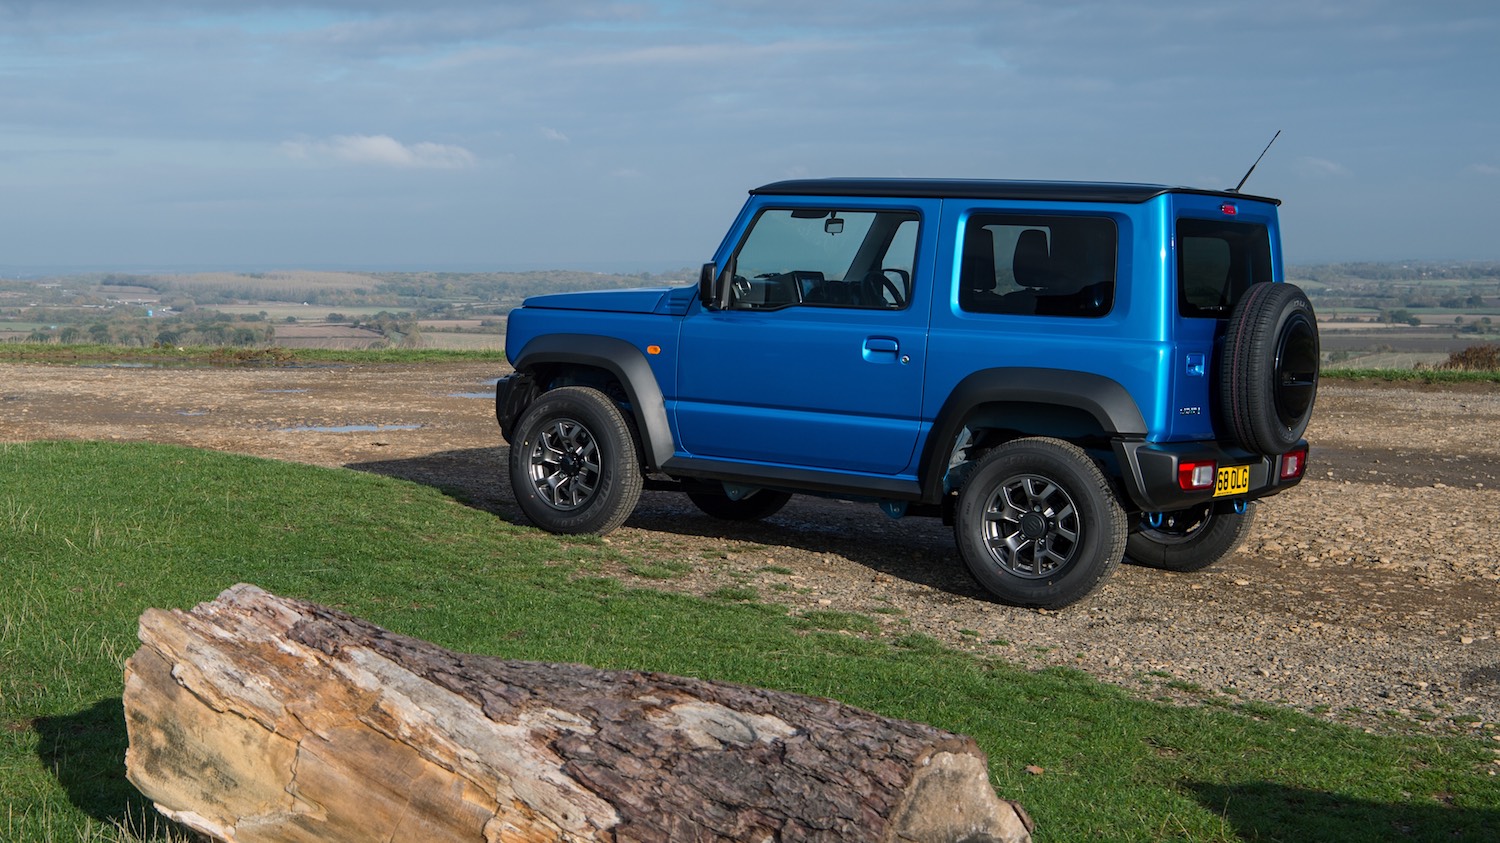 Tom Scanlan takes the All-New Jimny on and off-road 3